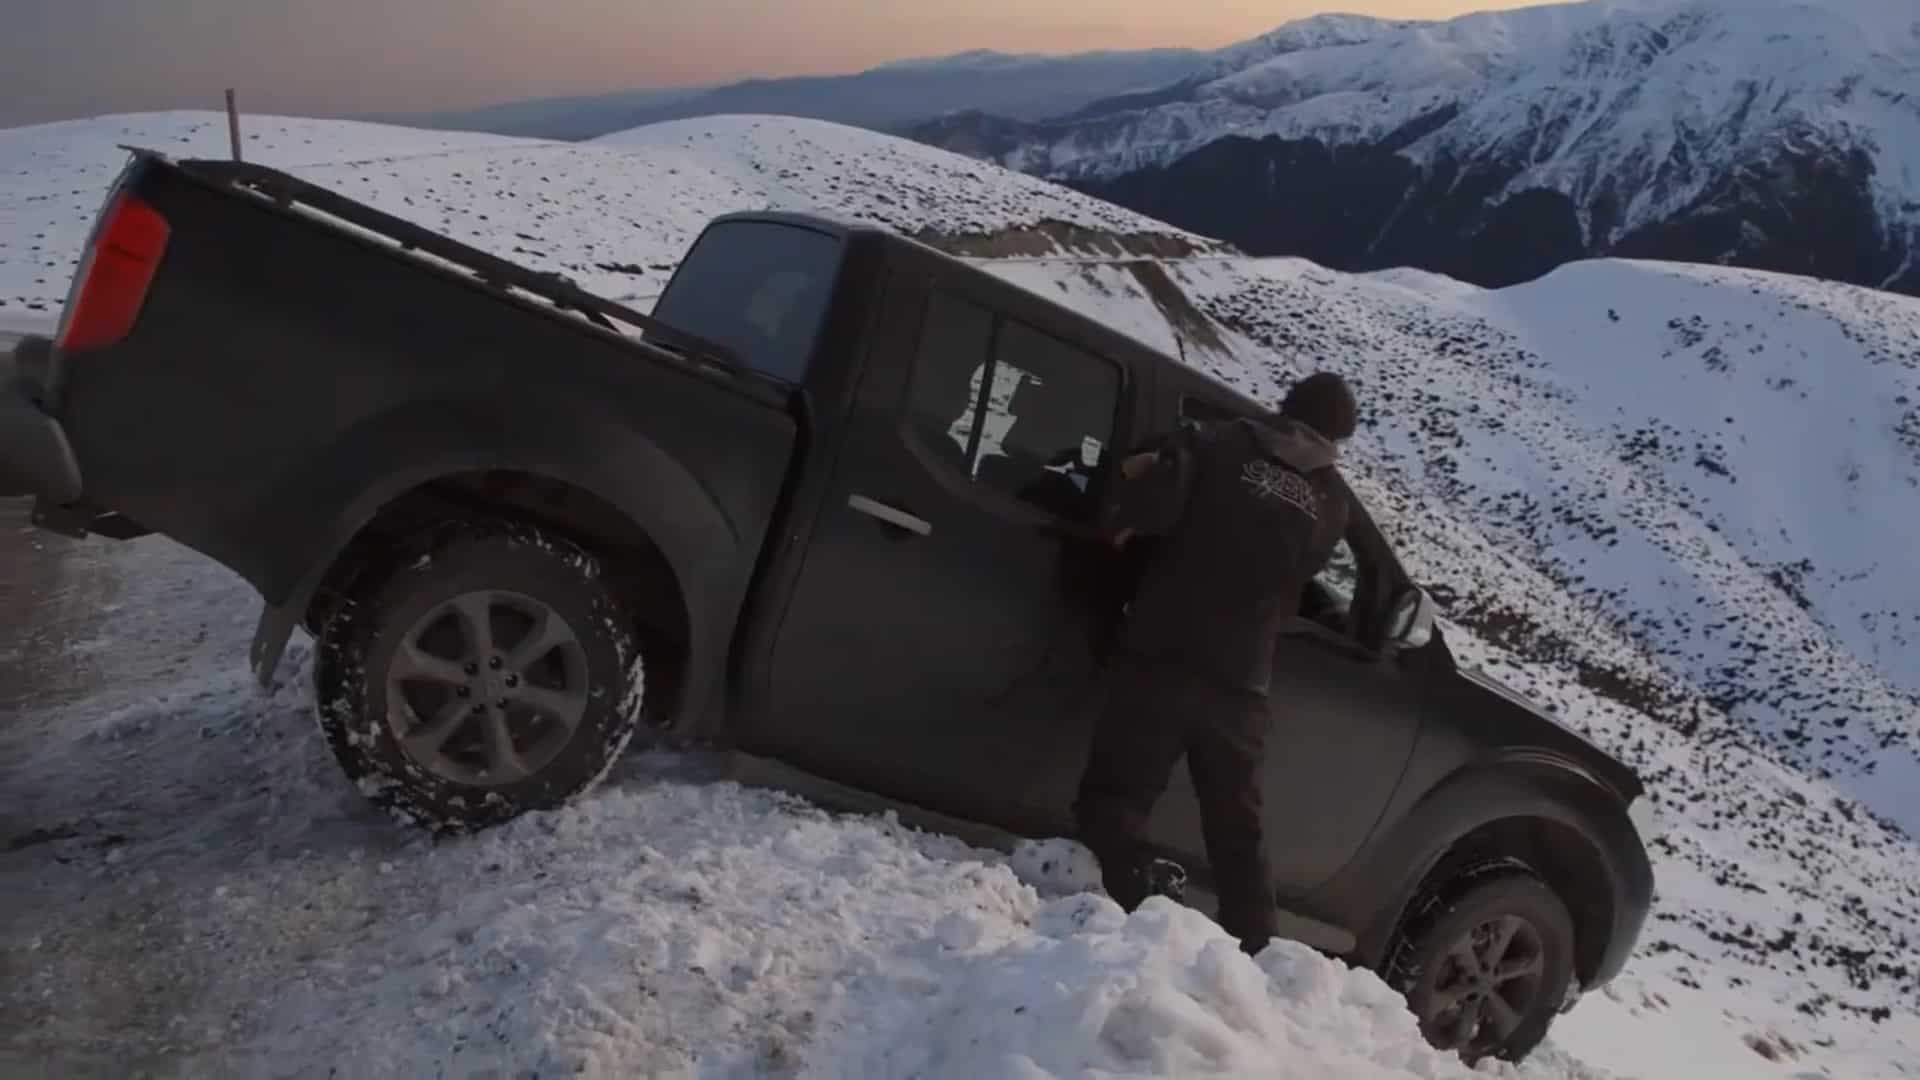 Mt Hutt Rescue: A man gets stuck with his truck in the middle of a mountain